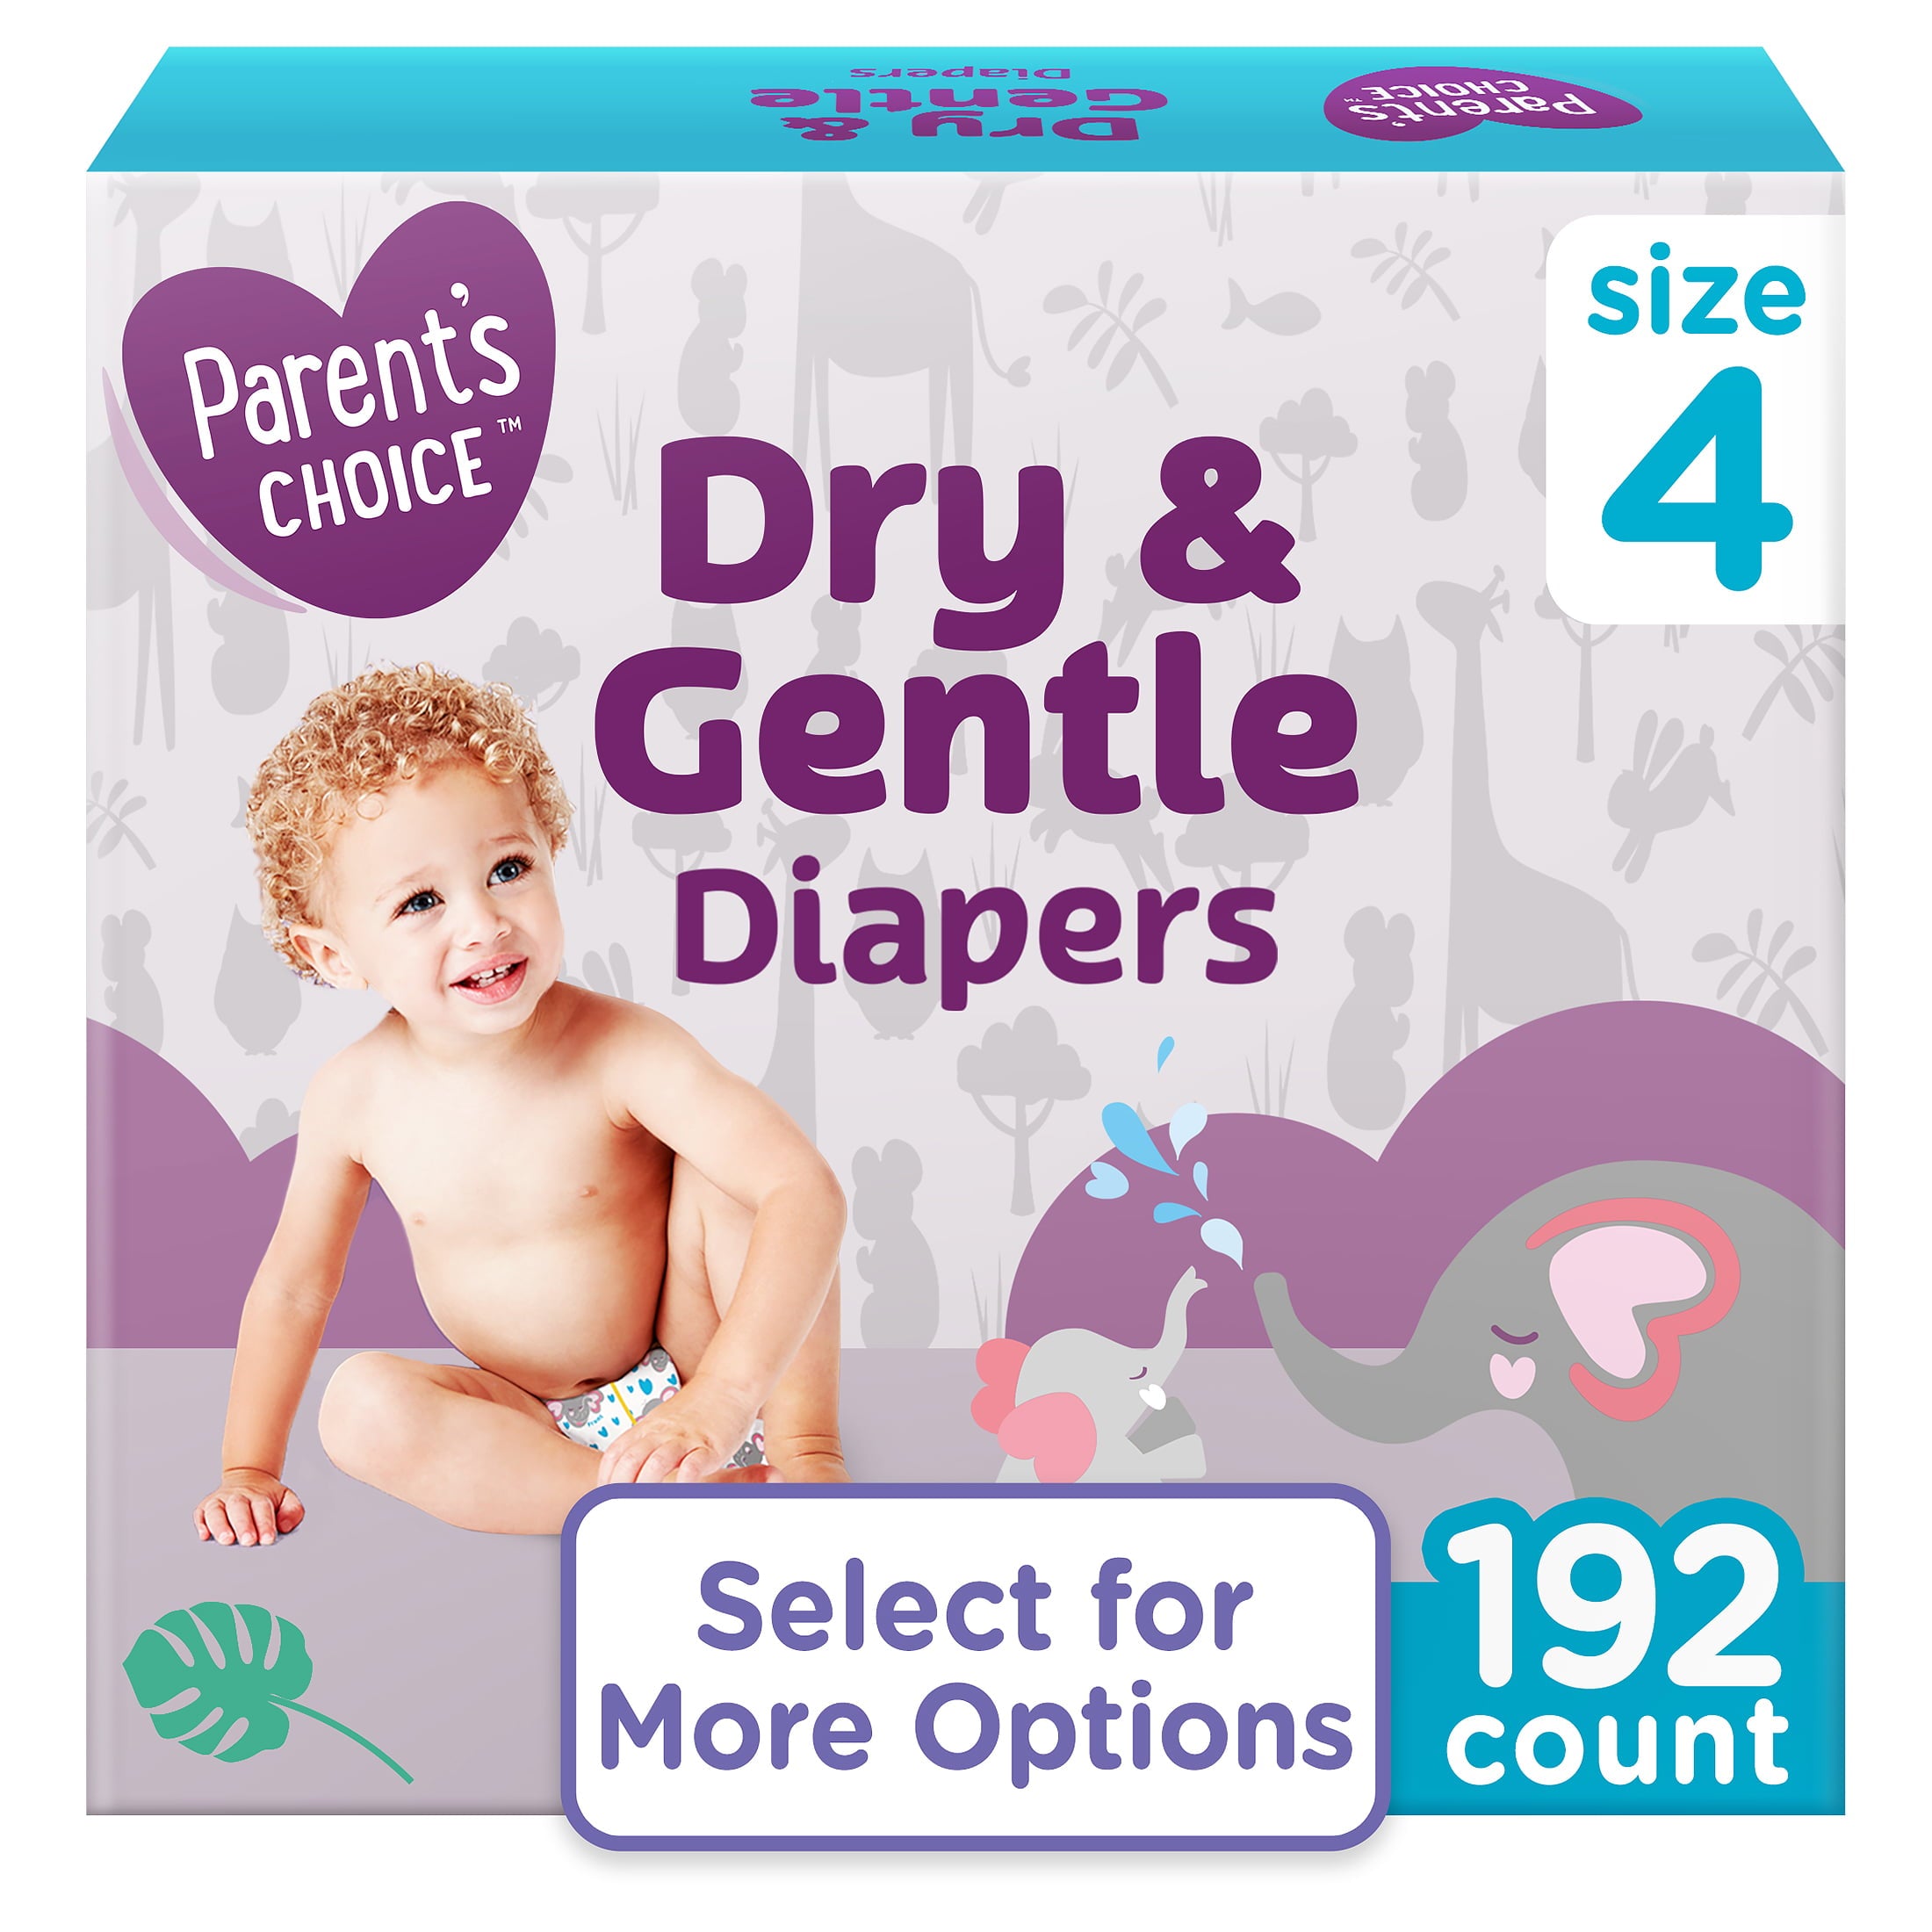 Parent's Choice Dry & Gentle Diapers Size 4, 192 Count